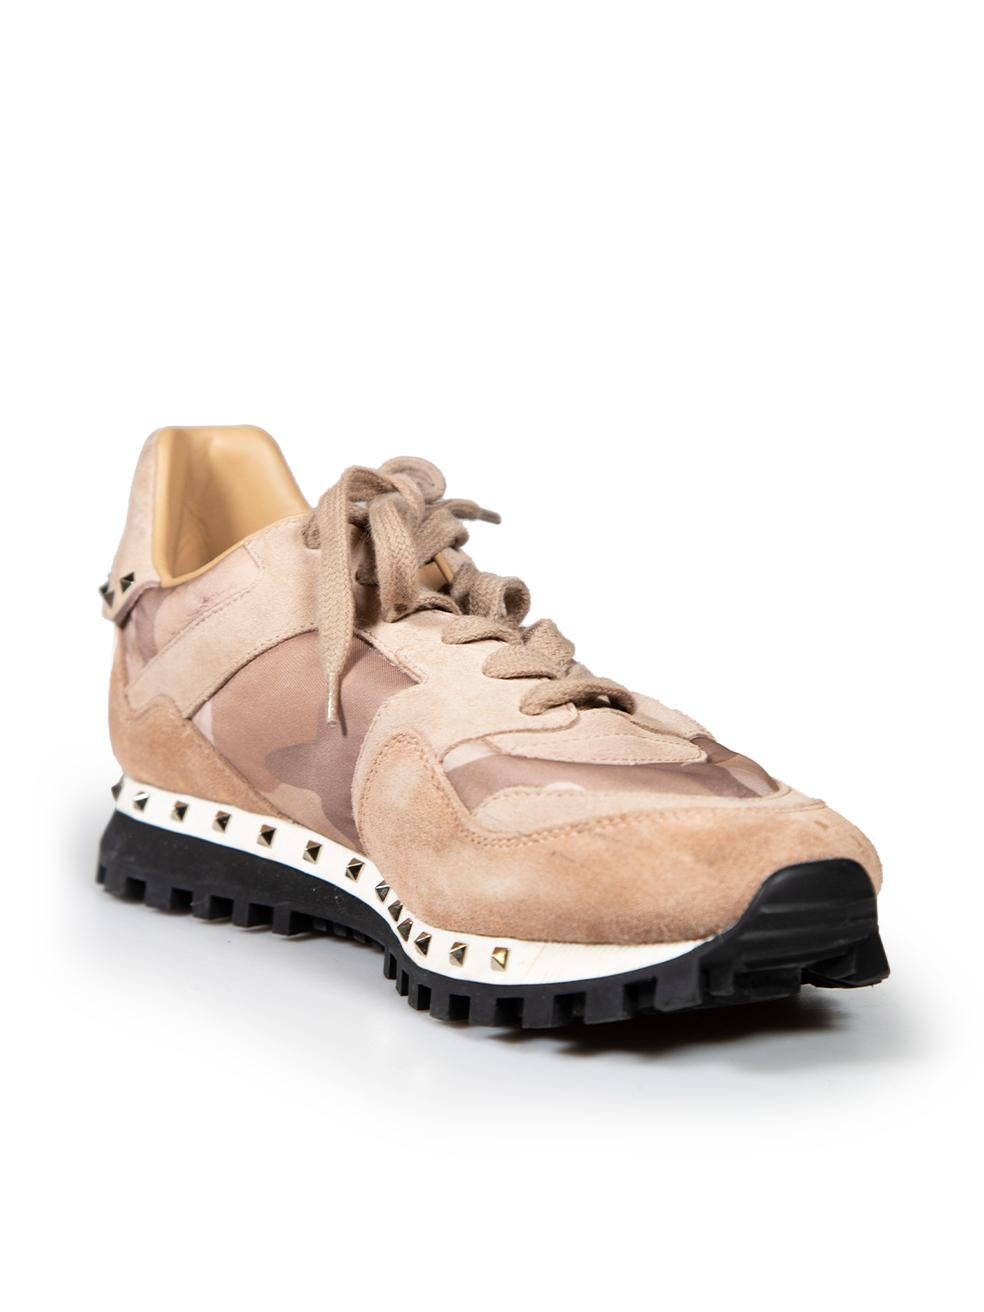 CONDITION is Very good. Minimal wear to trainers is evident. Minimal wear to both sides of both shoes with small marks and wear to the suede can be seen on this used Valentino Garavani designer resale item. Comes with original dust box and spare